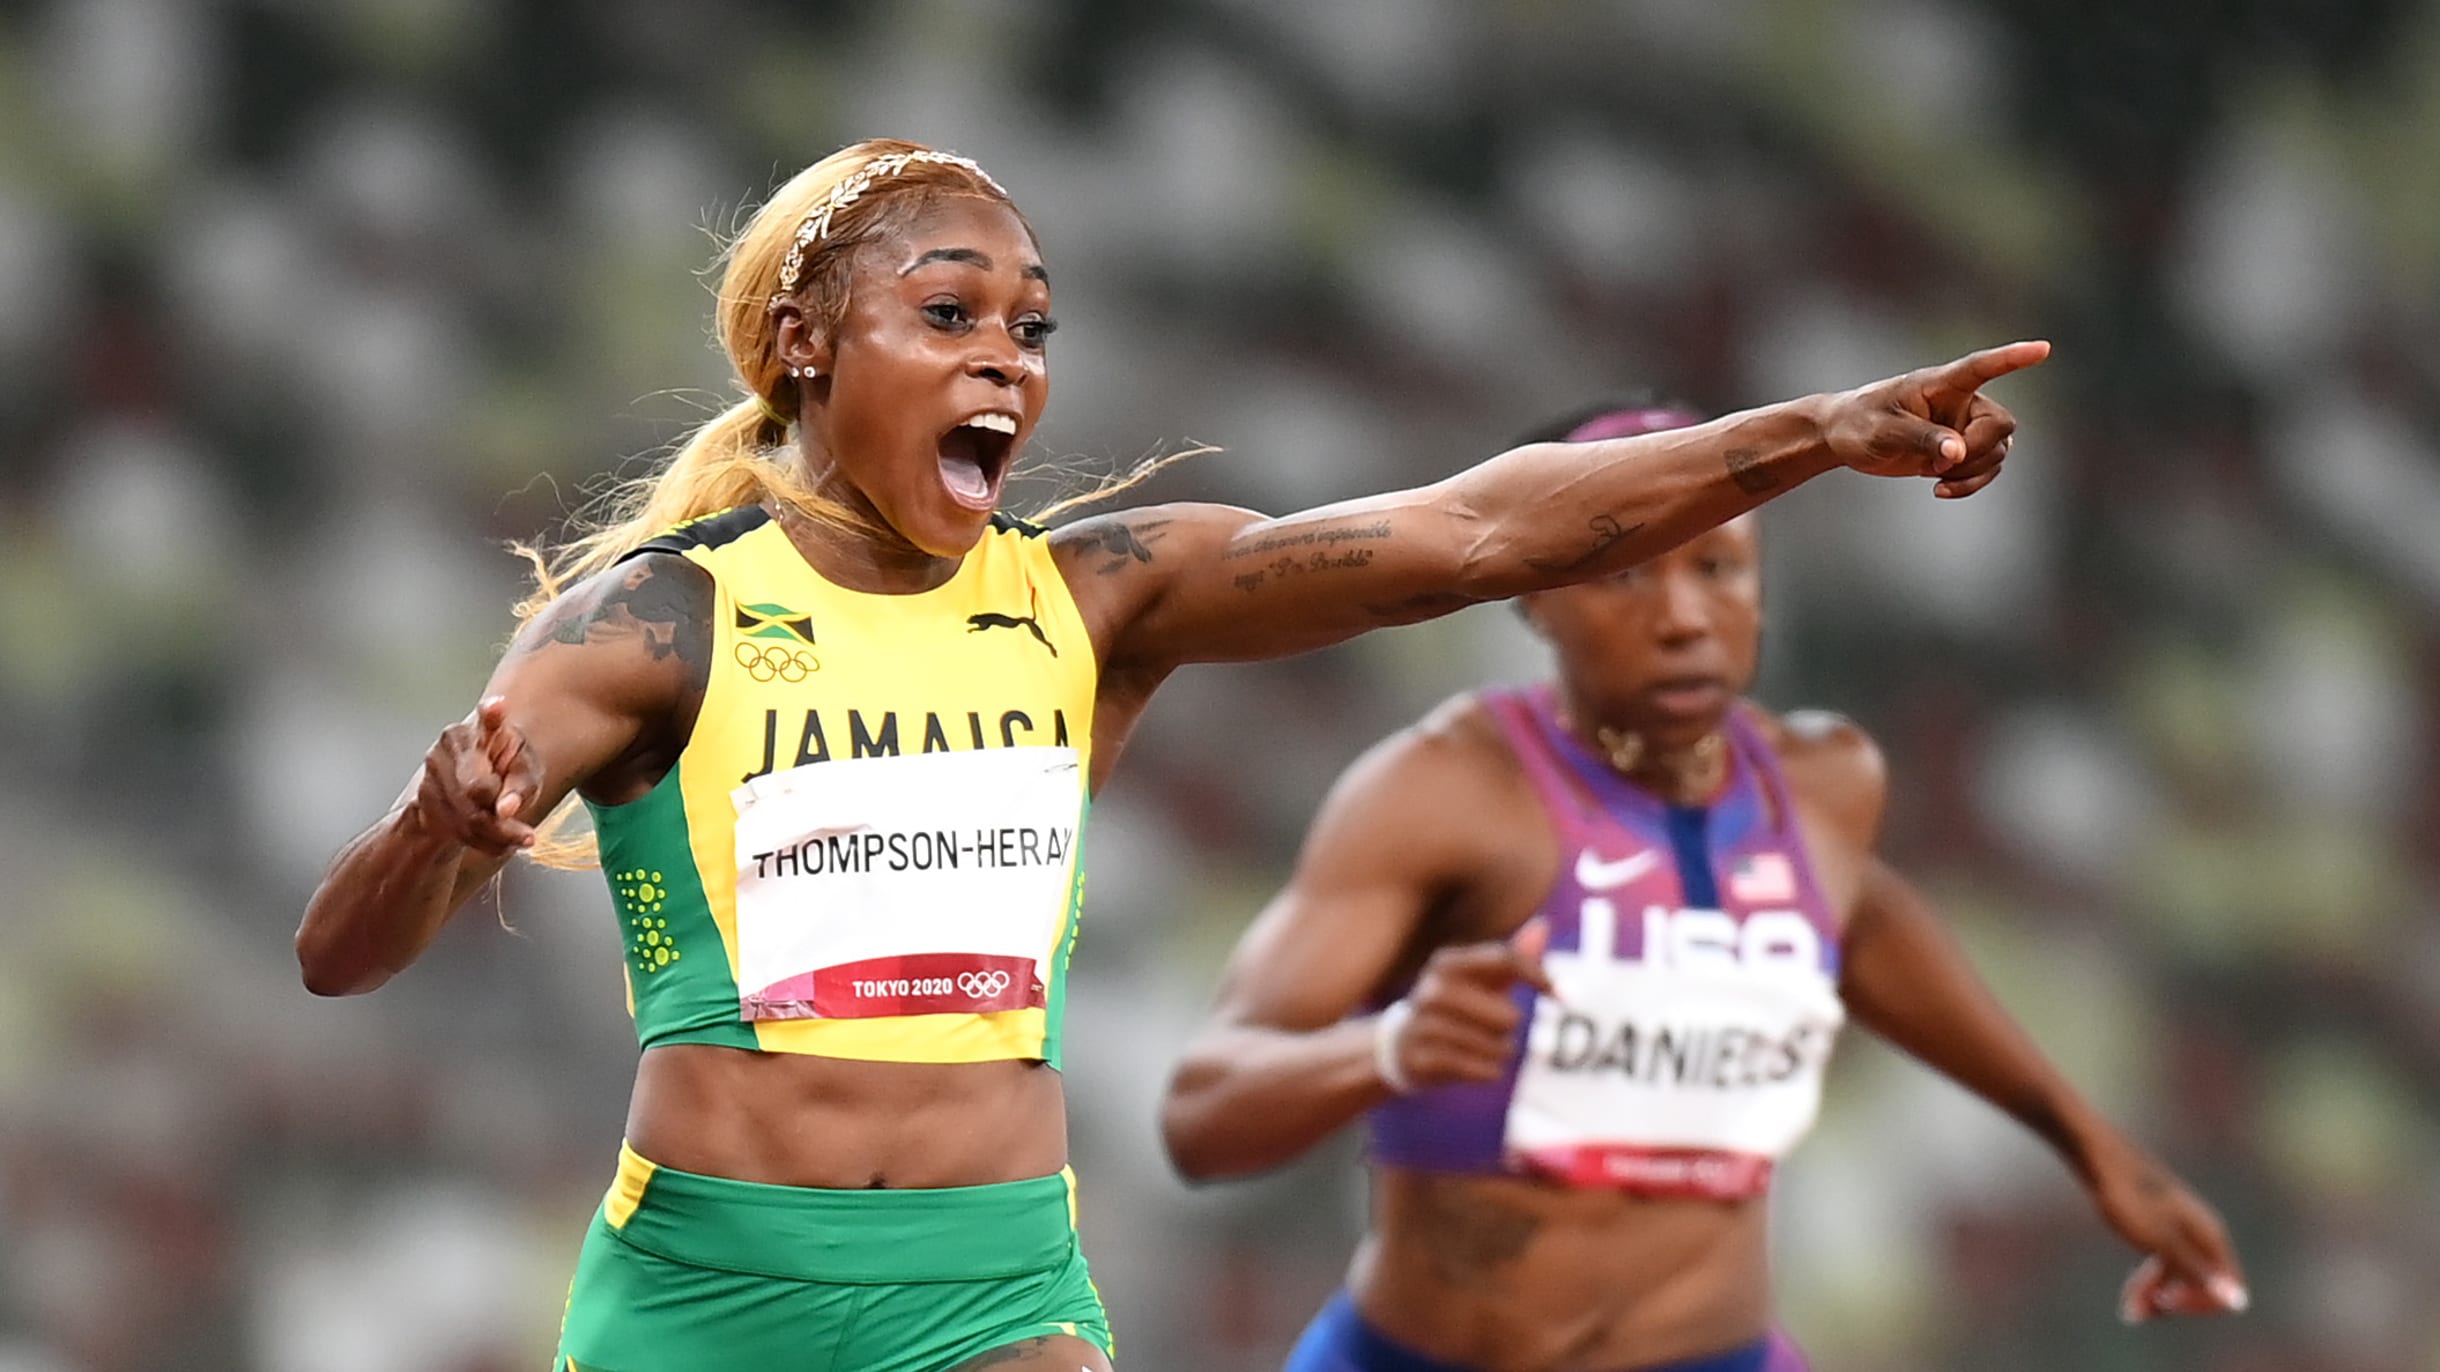 2022 World Championships Tour Details - Track & Field News